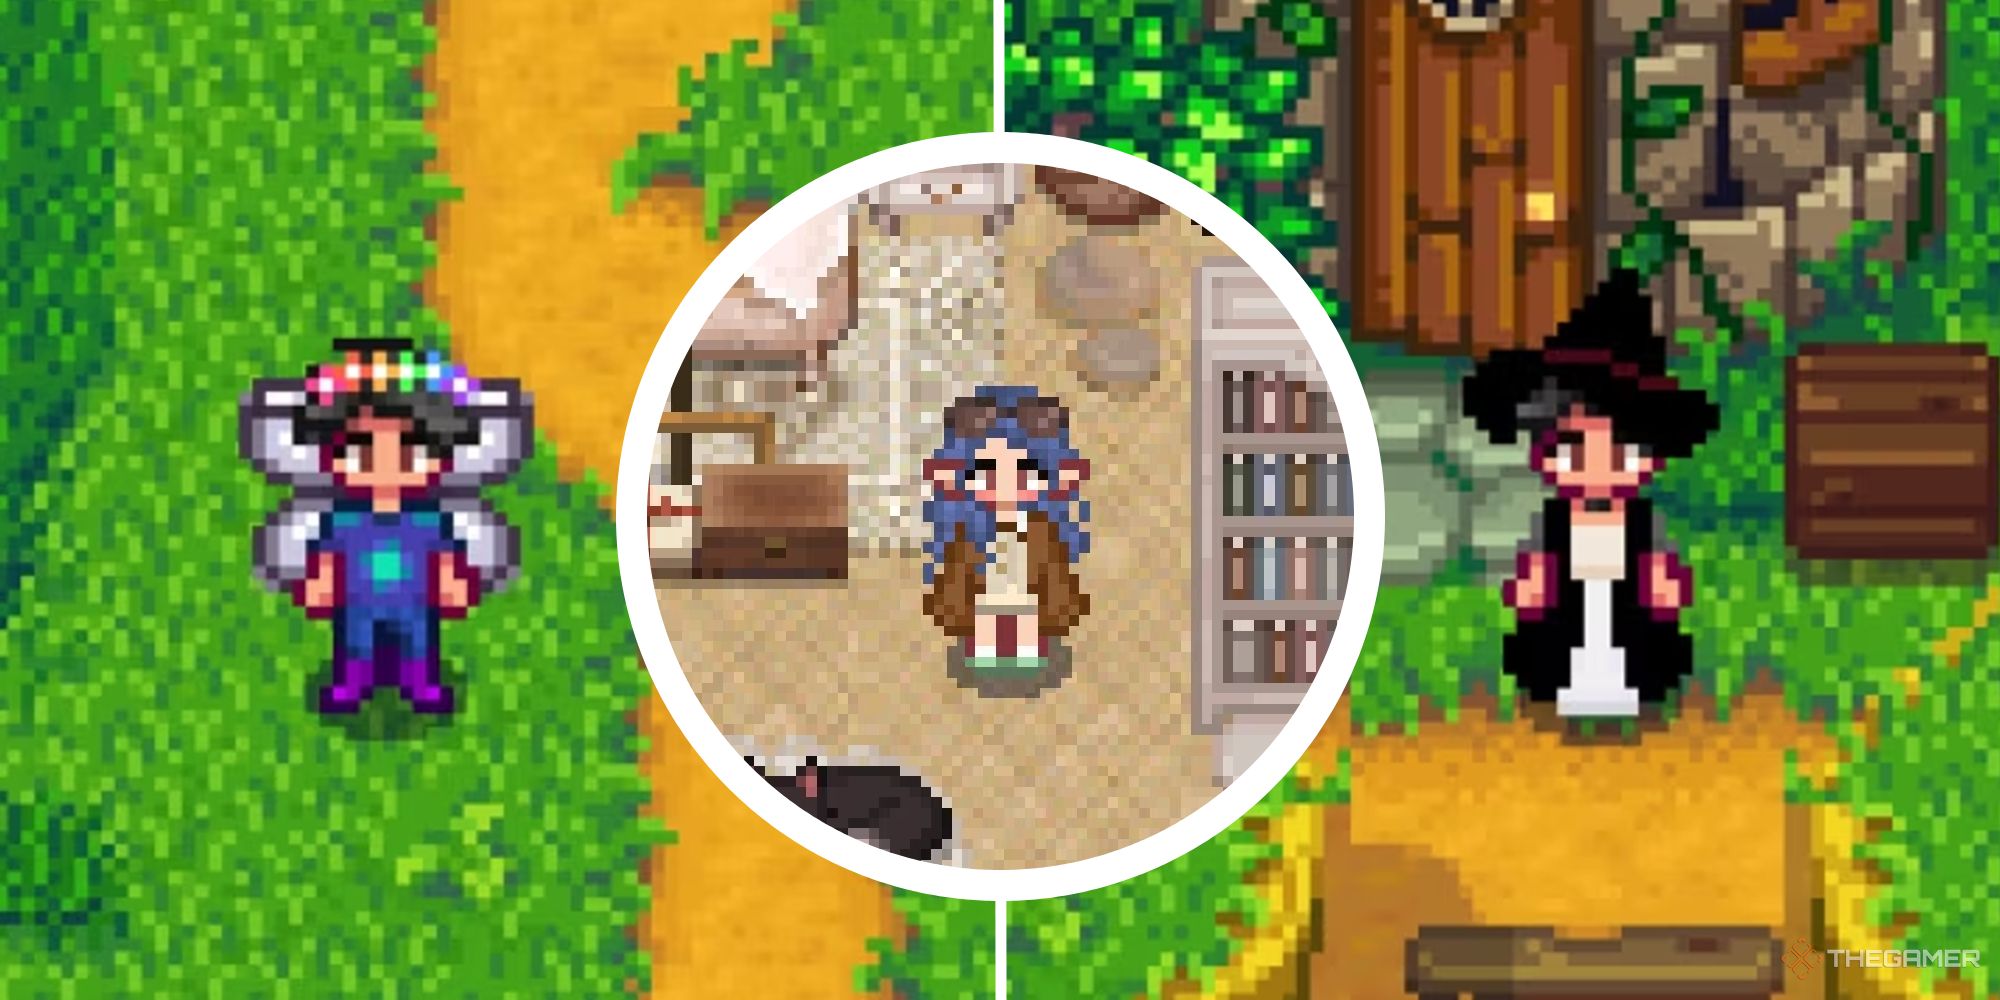 stardew valley best clothing mods featured image showcasing 3 mods